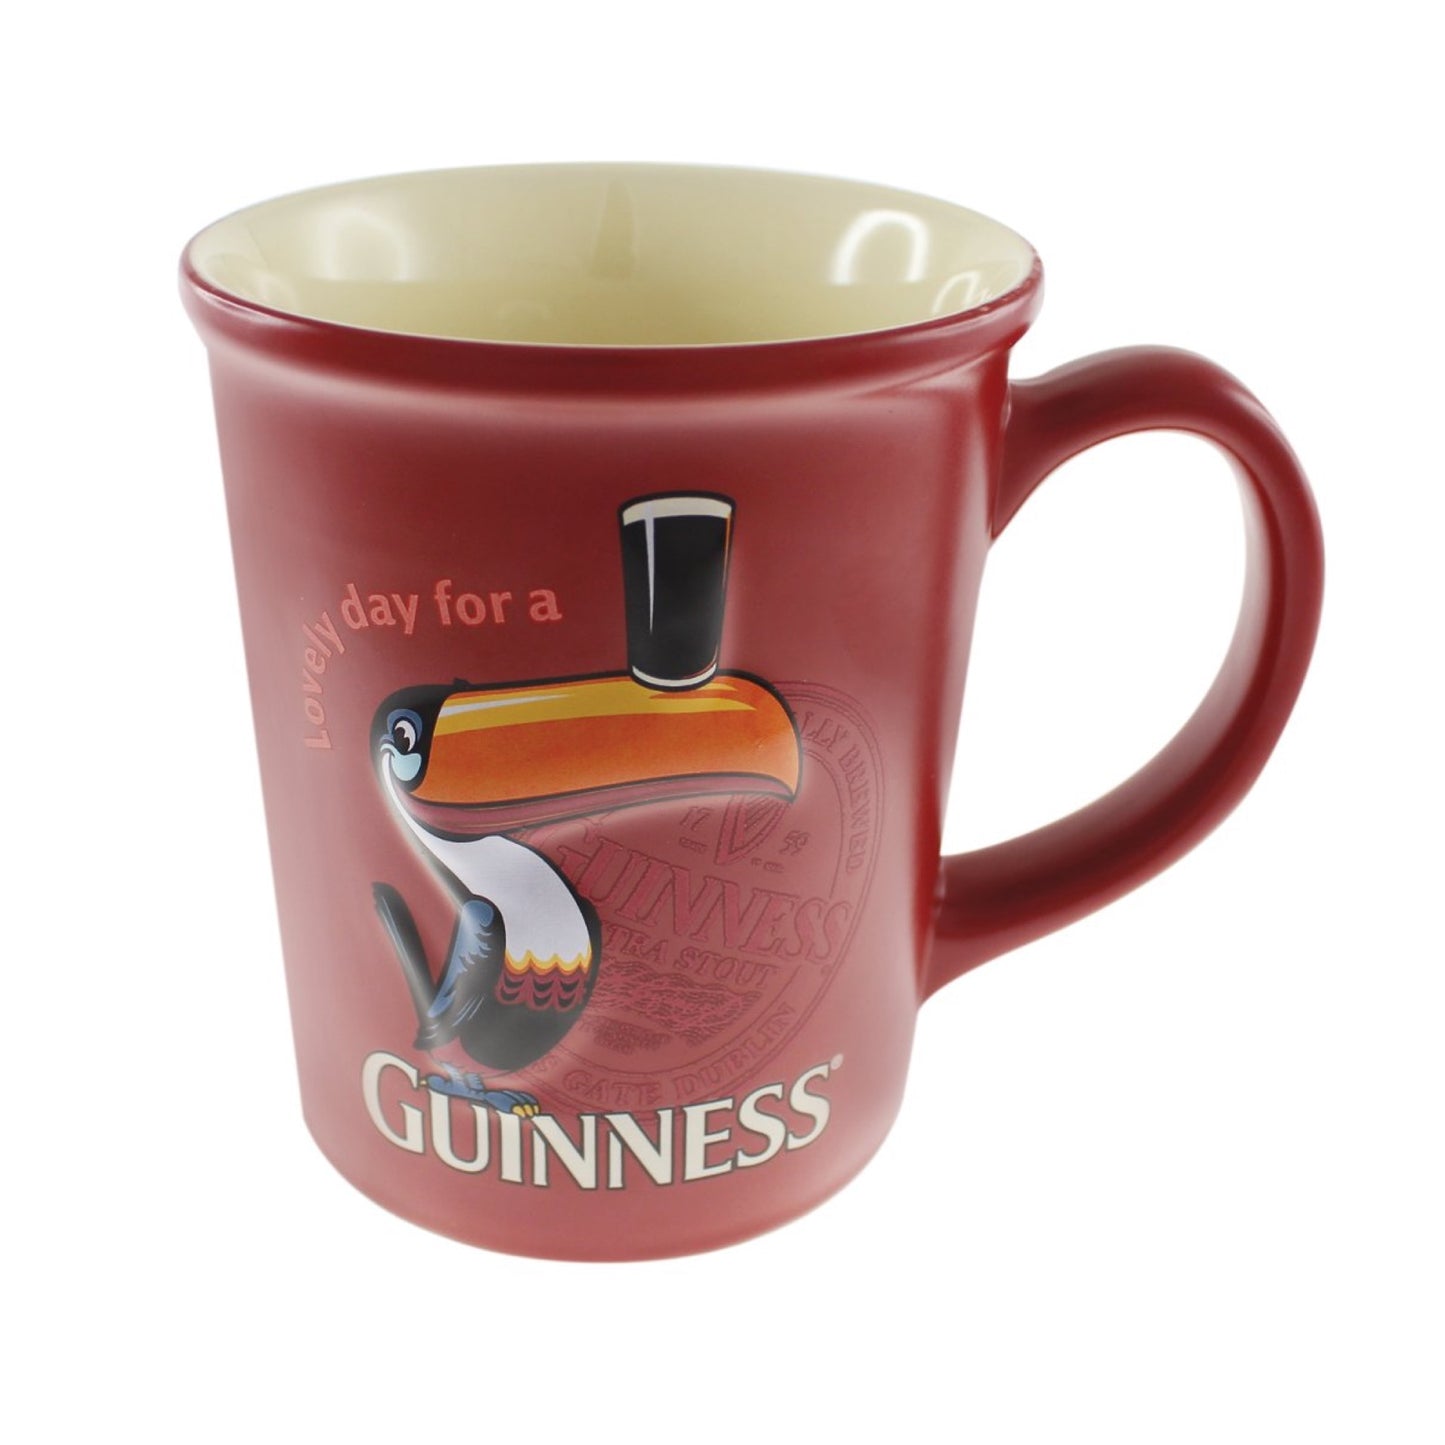 An official merchandise red Guinness® Toucan Mug featuring a toucan holding a pint on its beak, with the text "lovely day for a Guinness.